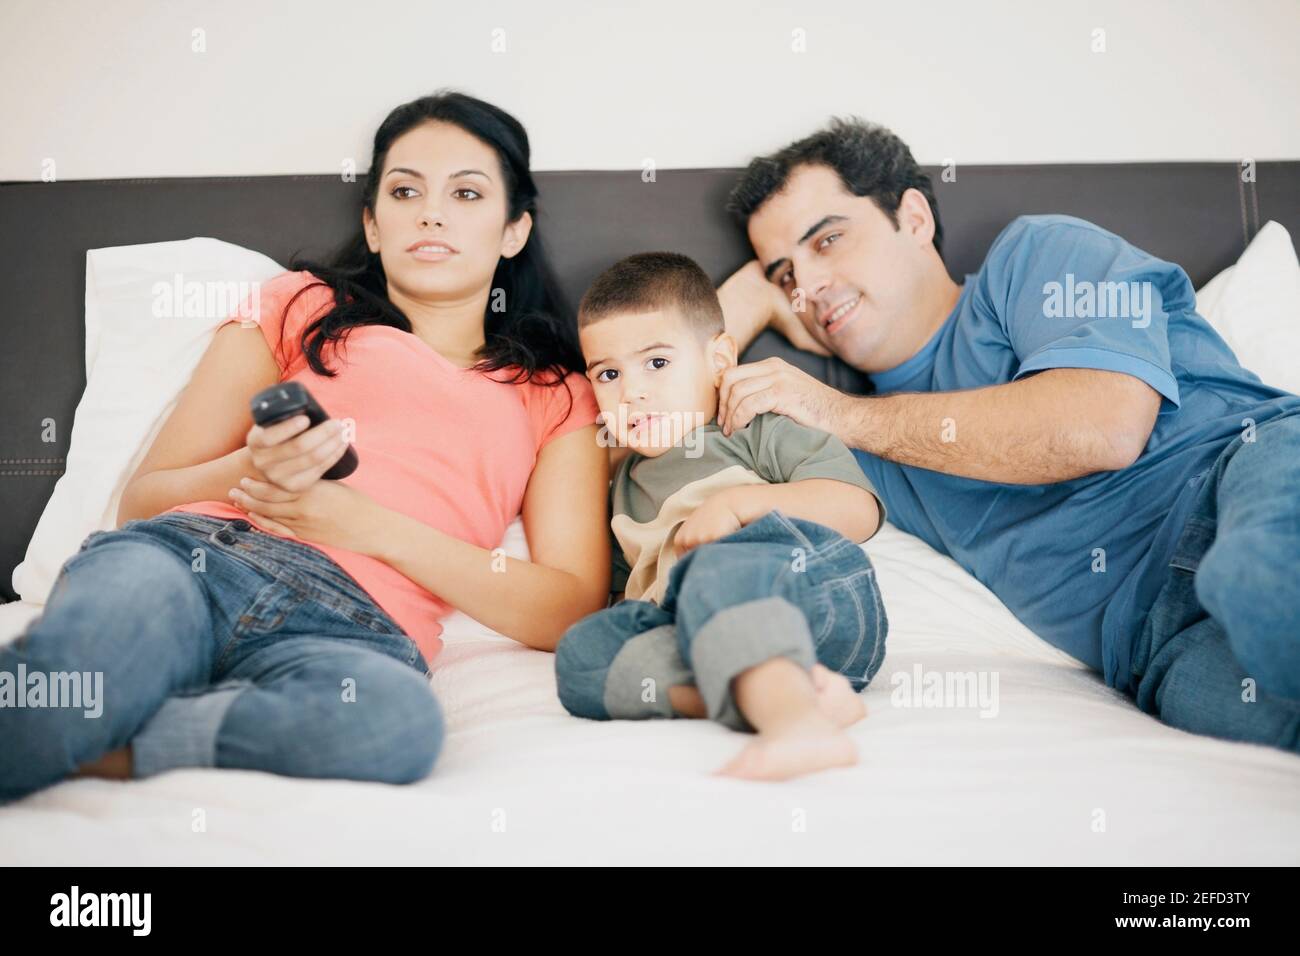 Portrait of a boy lying on the bed with his parents Stock Photo